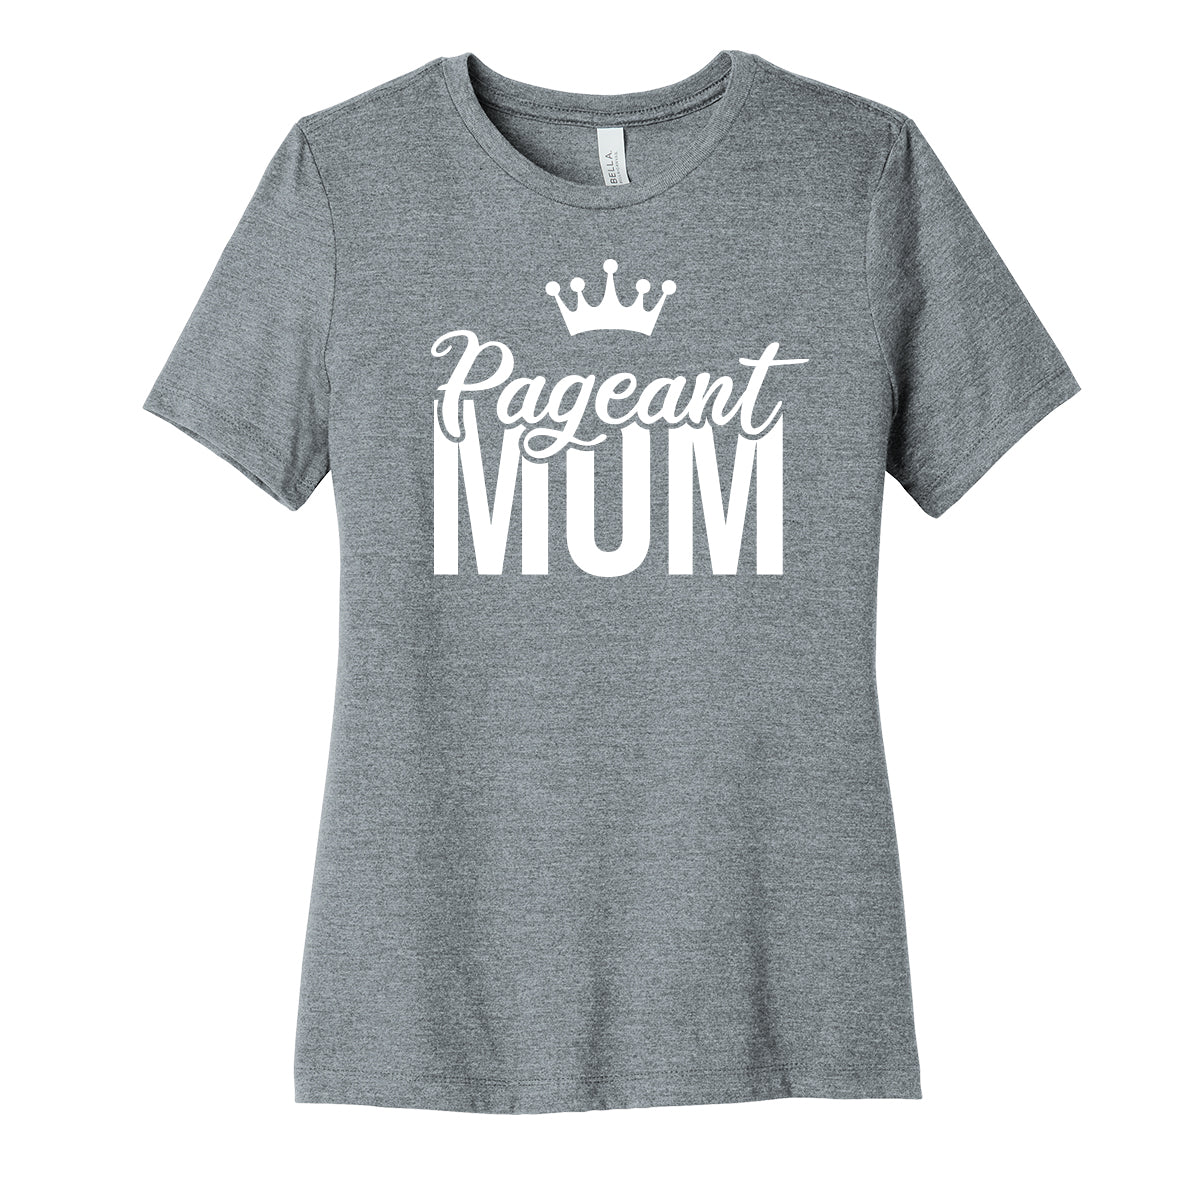 Pageant Mom Womens Fit Tee